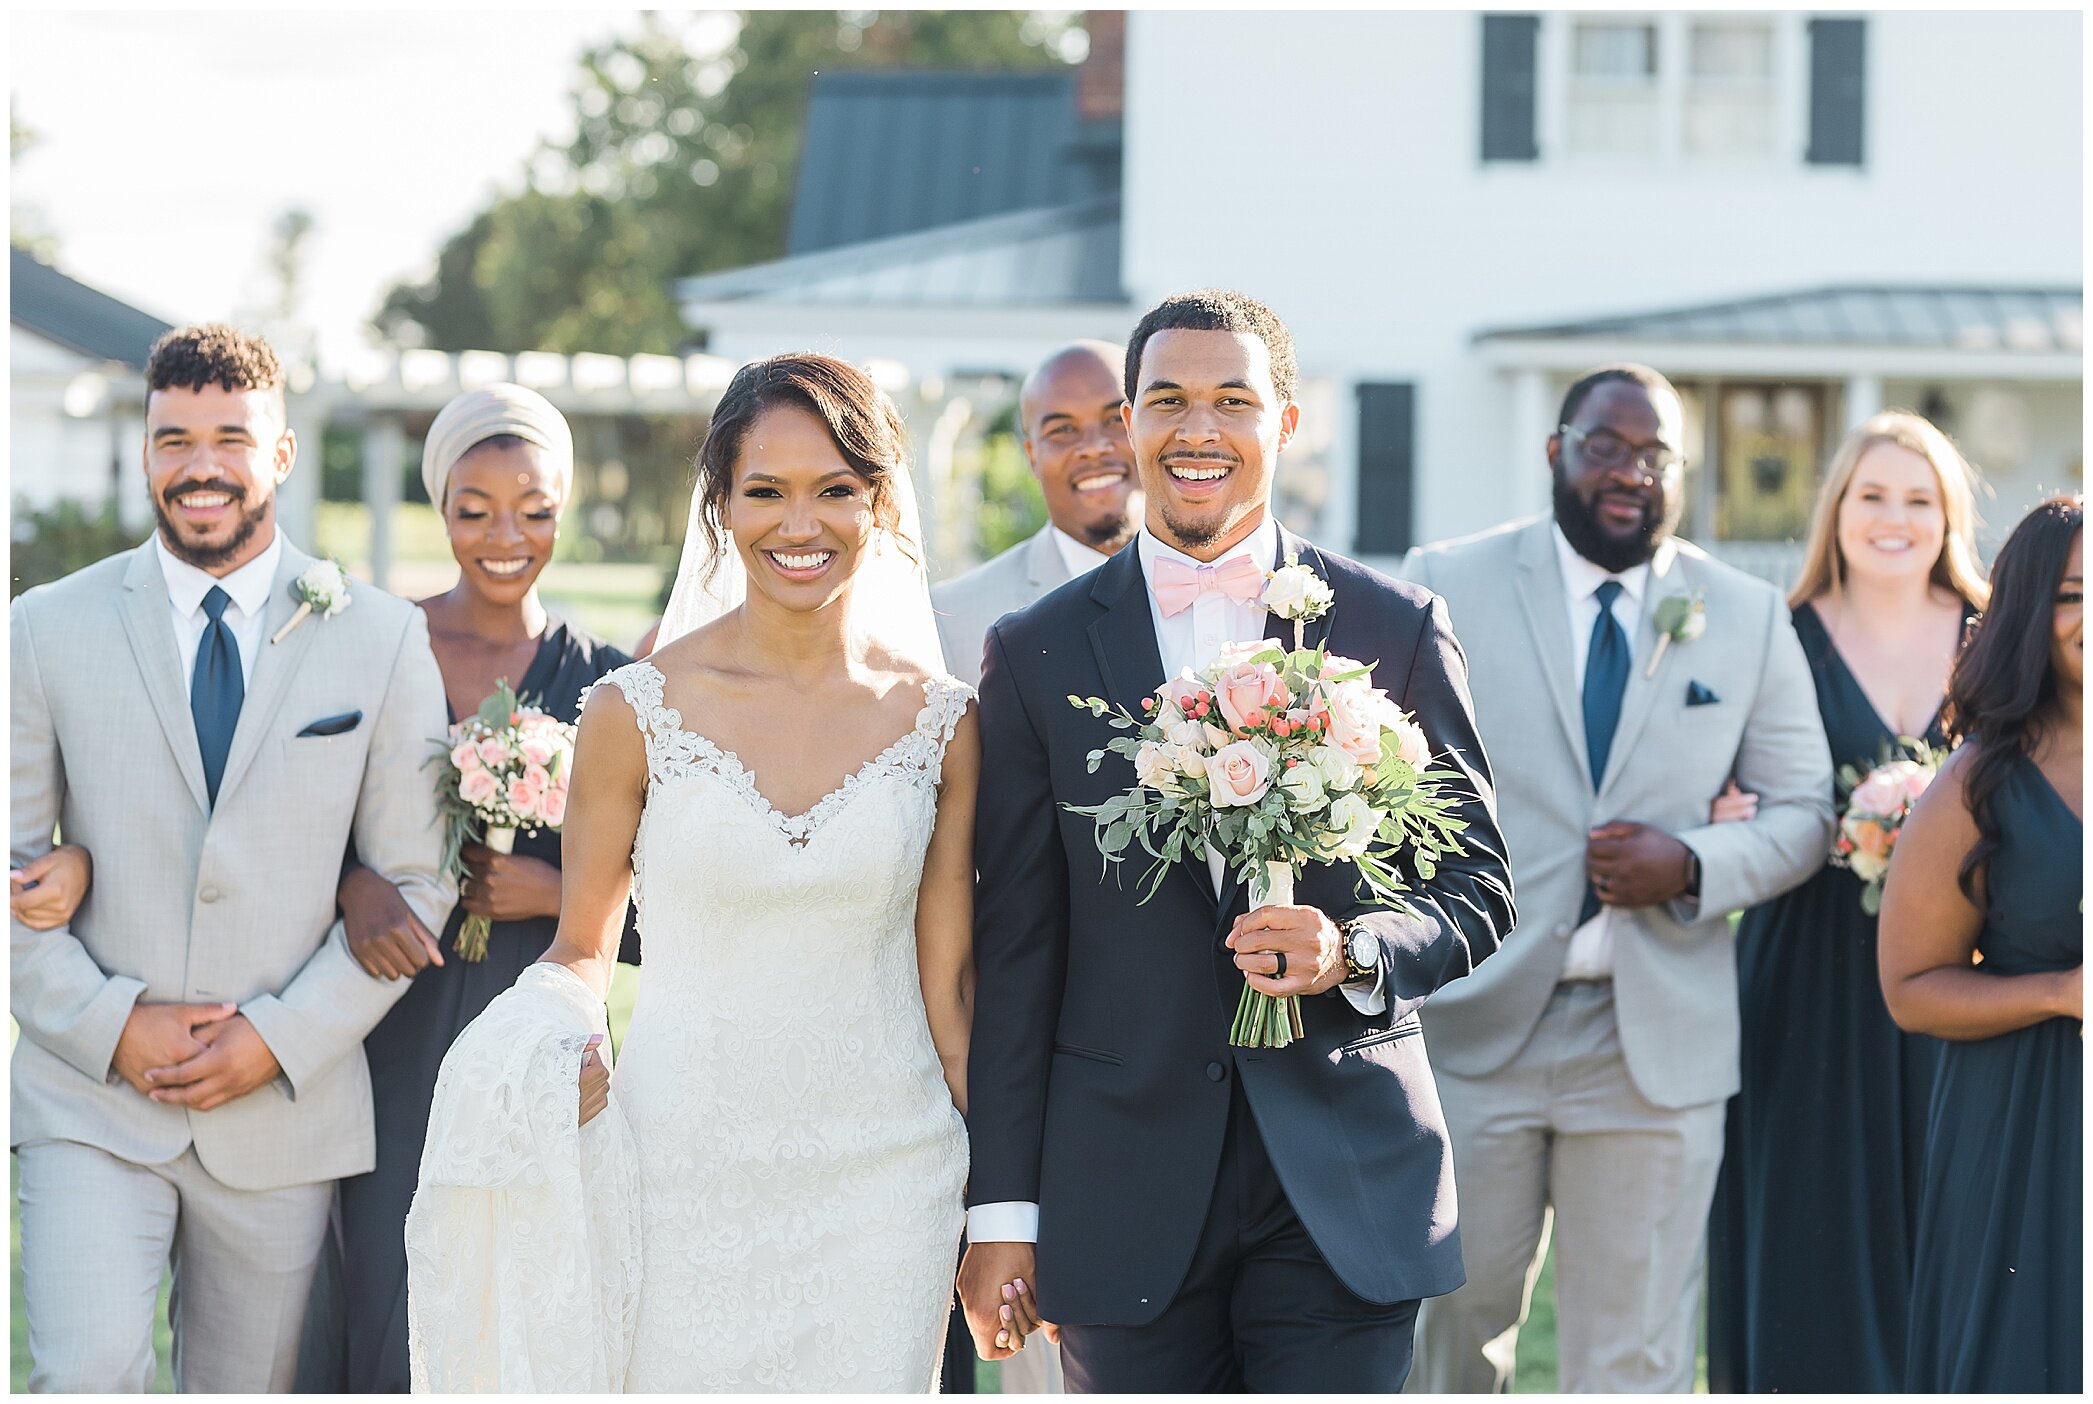 bride and groom walk with bridesmaids in teal gowns and groomsmen in grey suits at The Barns at Timberneck